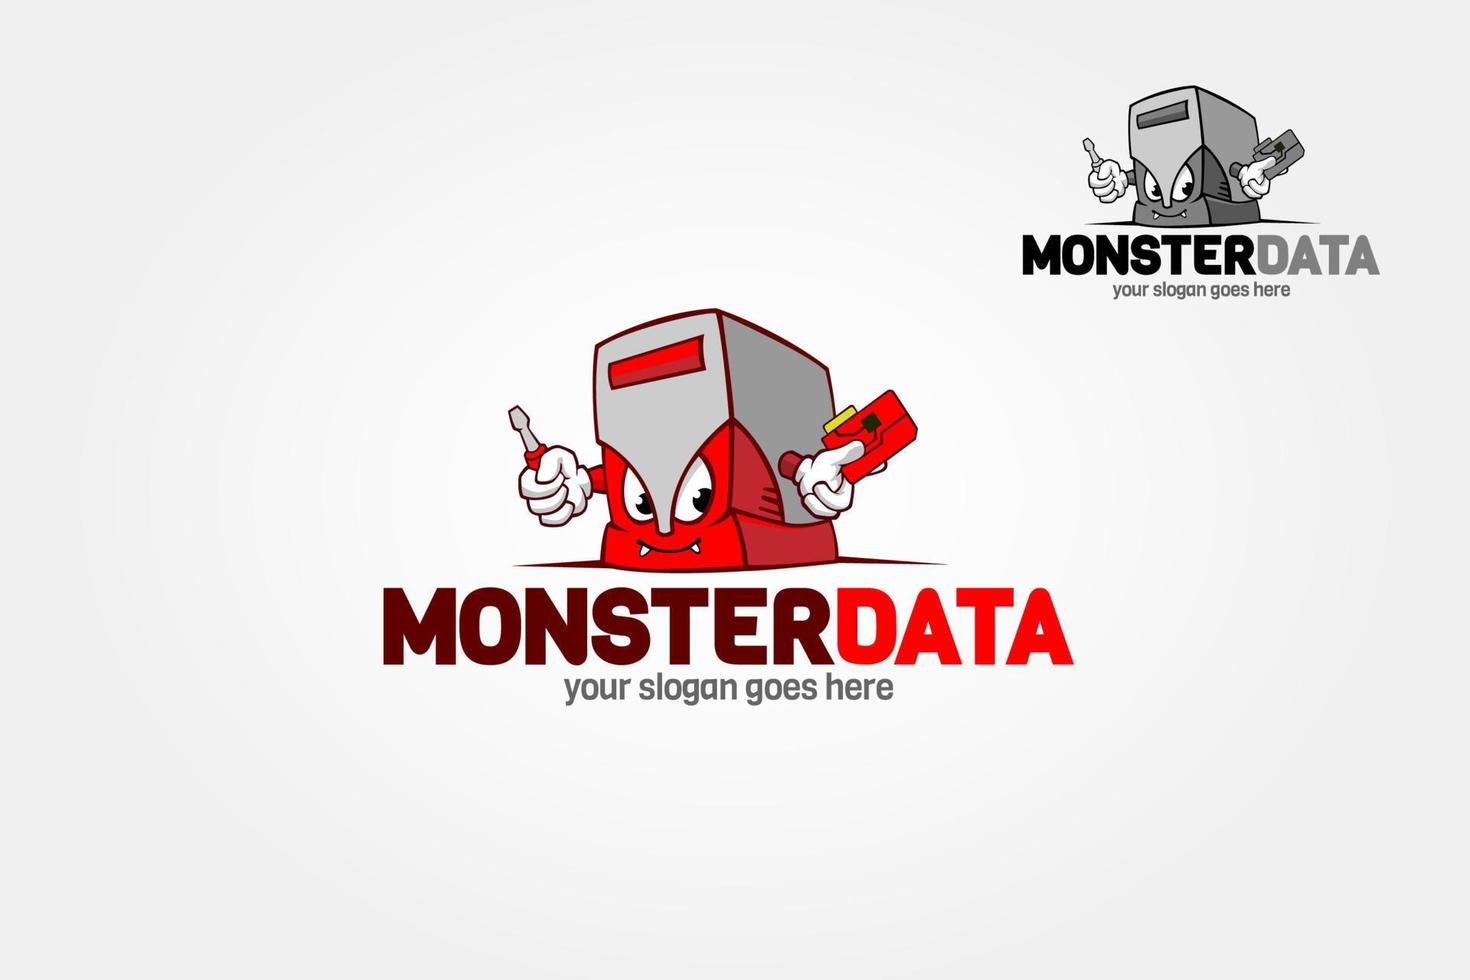 Monster Data Creative Logo Template. This Cartoon Character logo design for mobile application, design studio, progamming, computing and creative business. vector